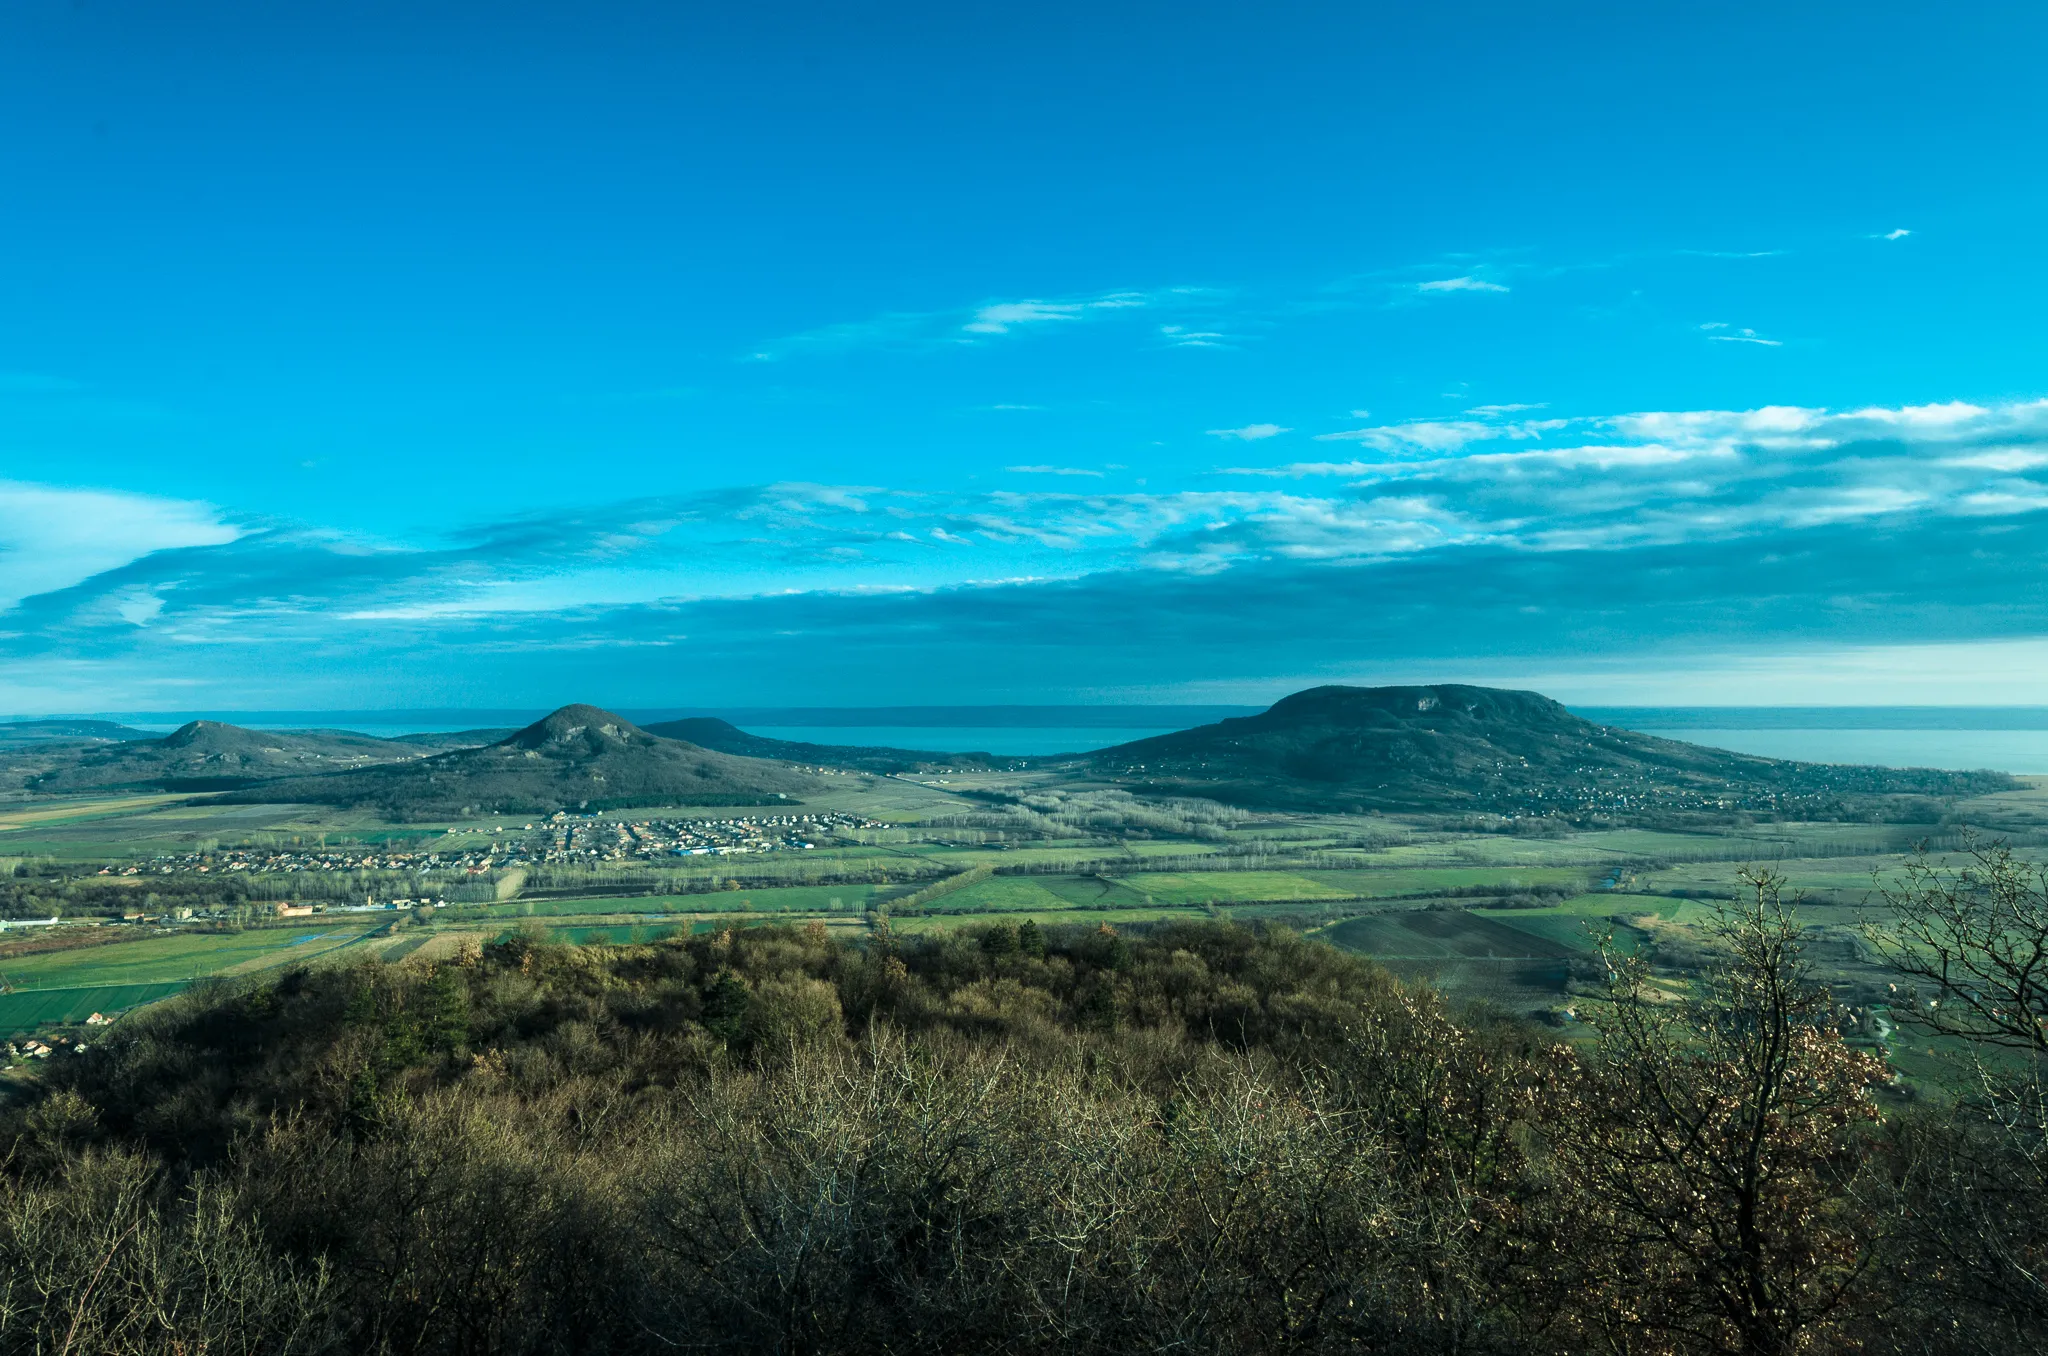 Photo showing: Some of the extinct volcanoes of the Bakony-Balaton Highland Volcanic Field near Lake Balaton in Hungary. The volcanoes are Tóti-hegy (on left), Gulács (in middle) and Badacsony (on right). These volcanoes are of Neogene age, between 3 and 6 million years old.